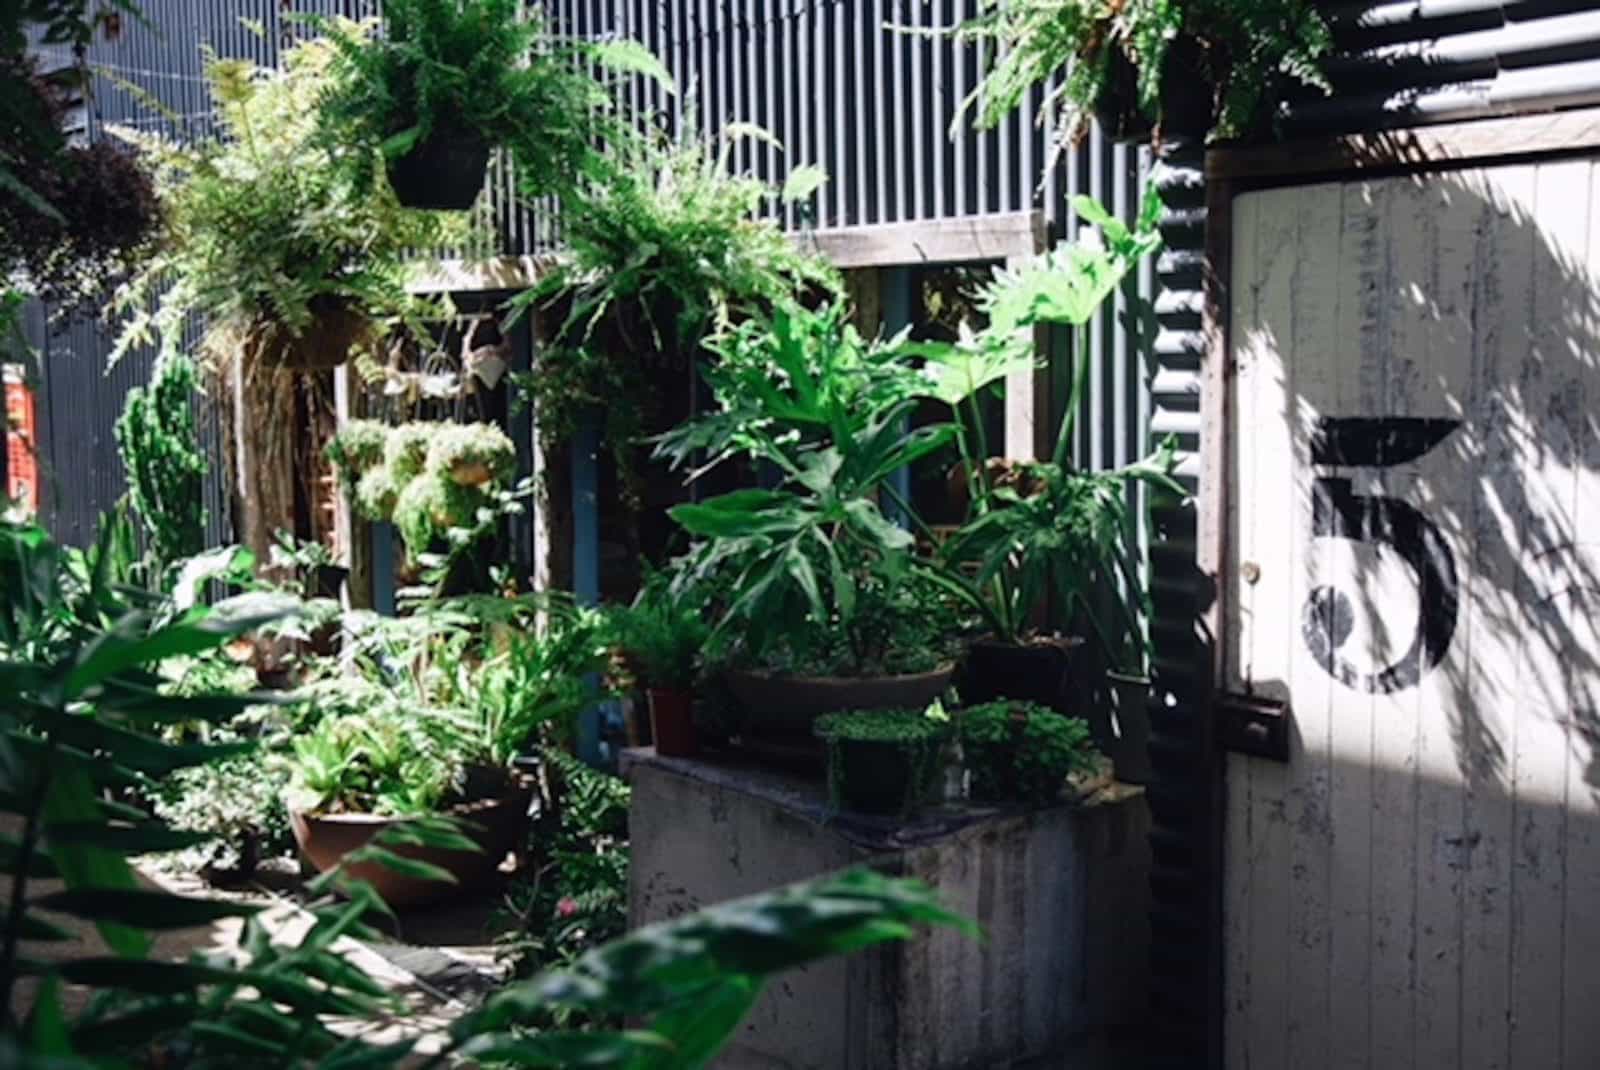 Gather and Dust Temple alleyway filled with beautiful plants